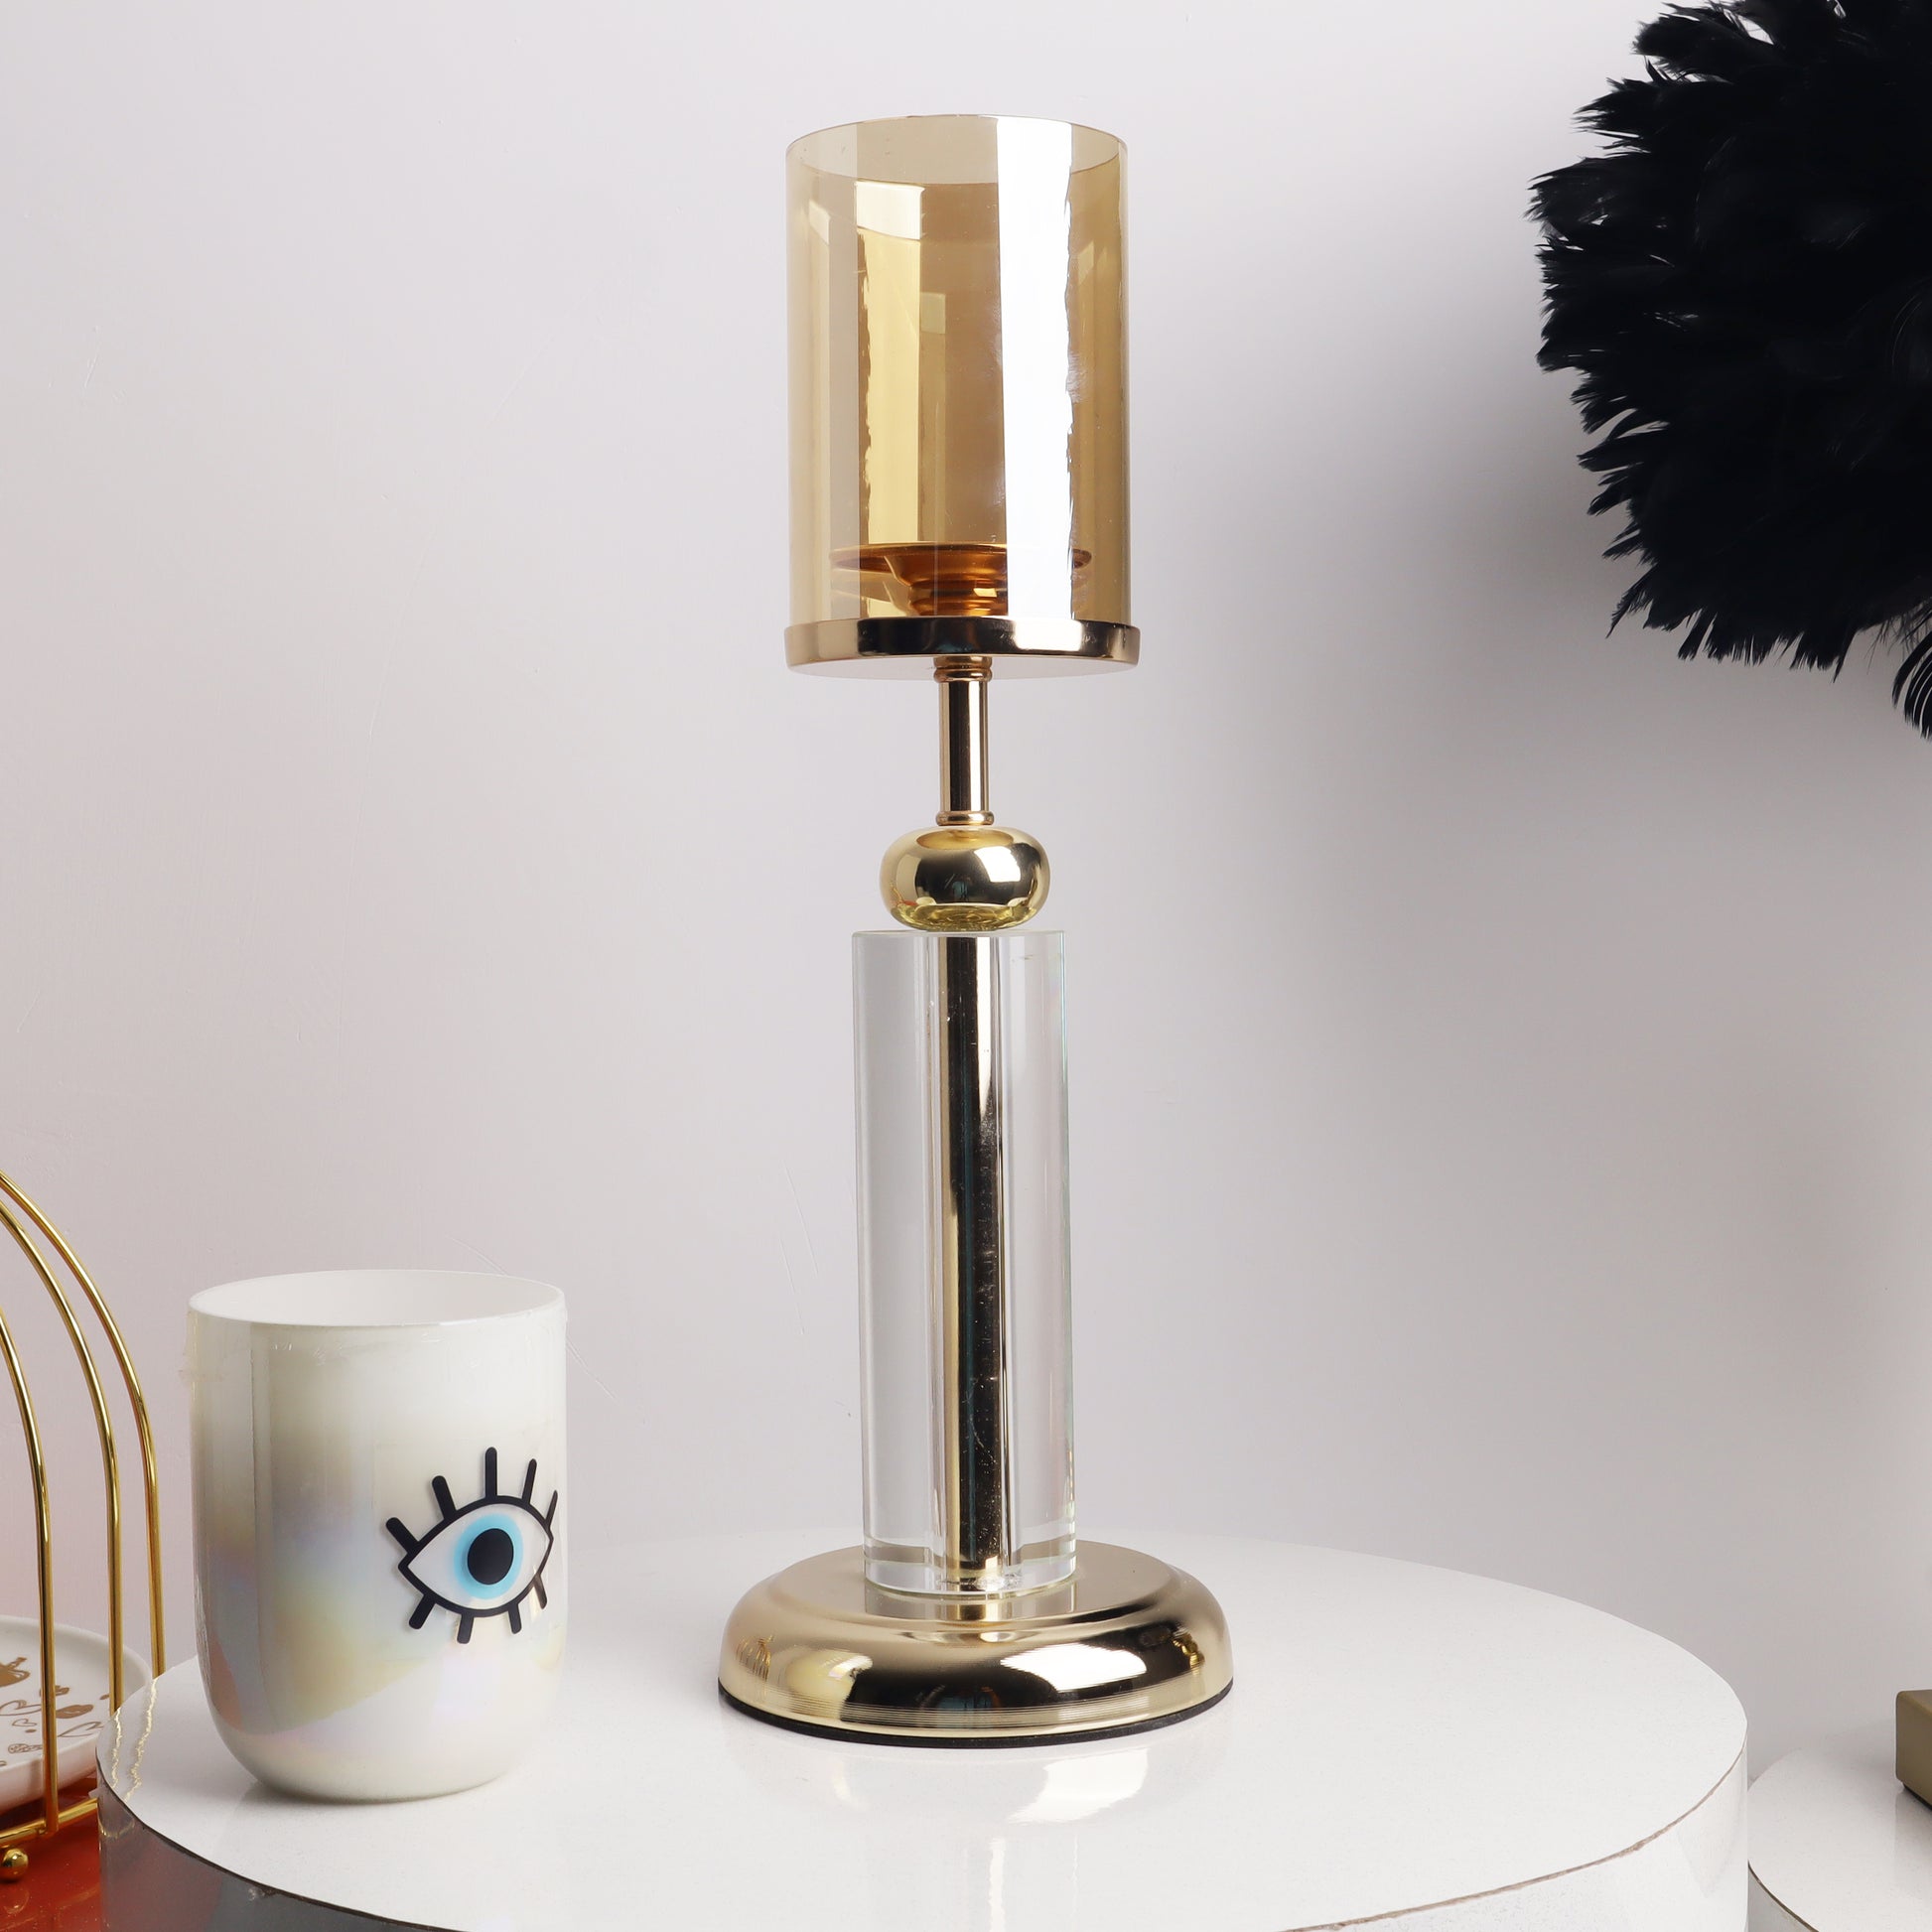 Swasha's elegant candle stand - perfect for ambient lighting and decor accents